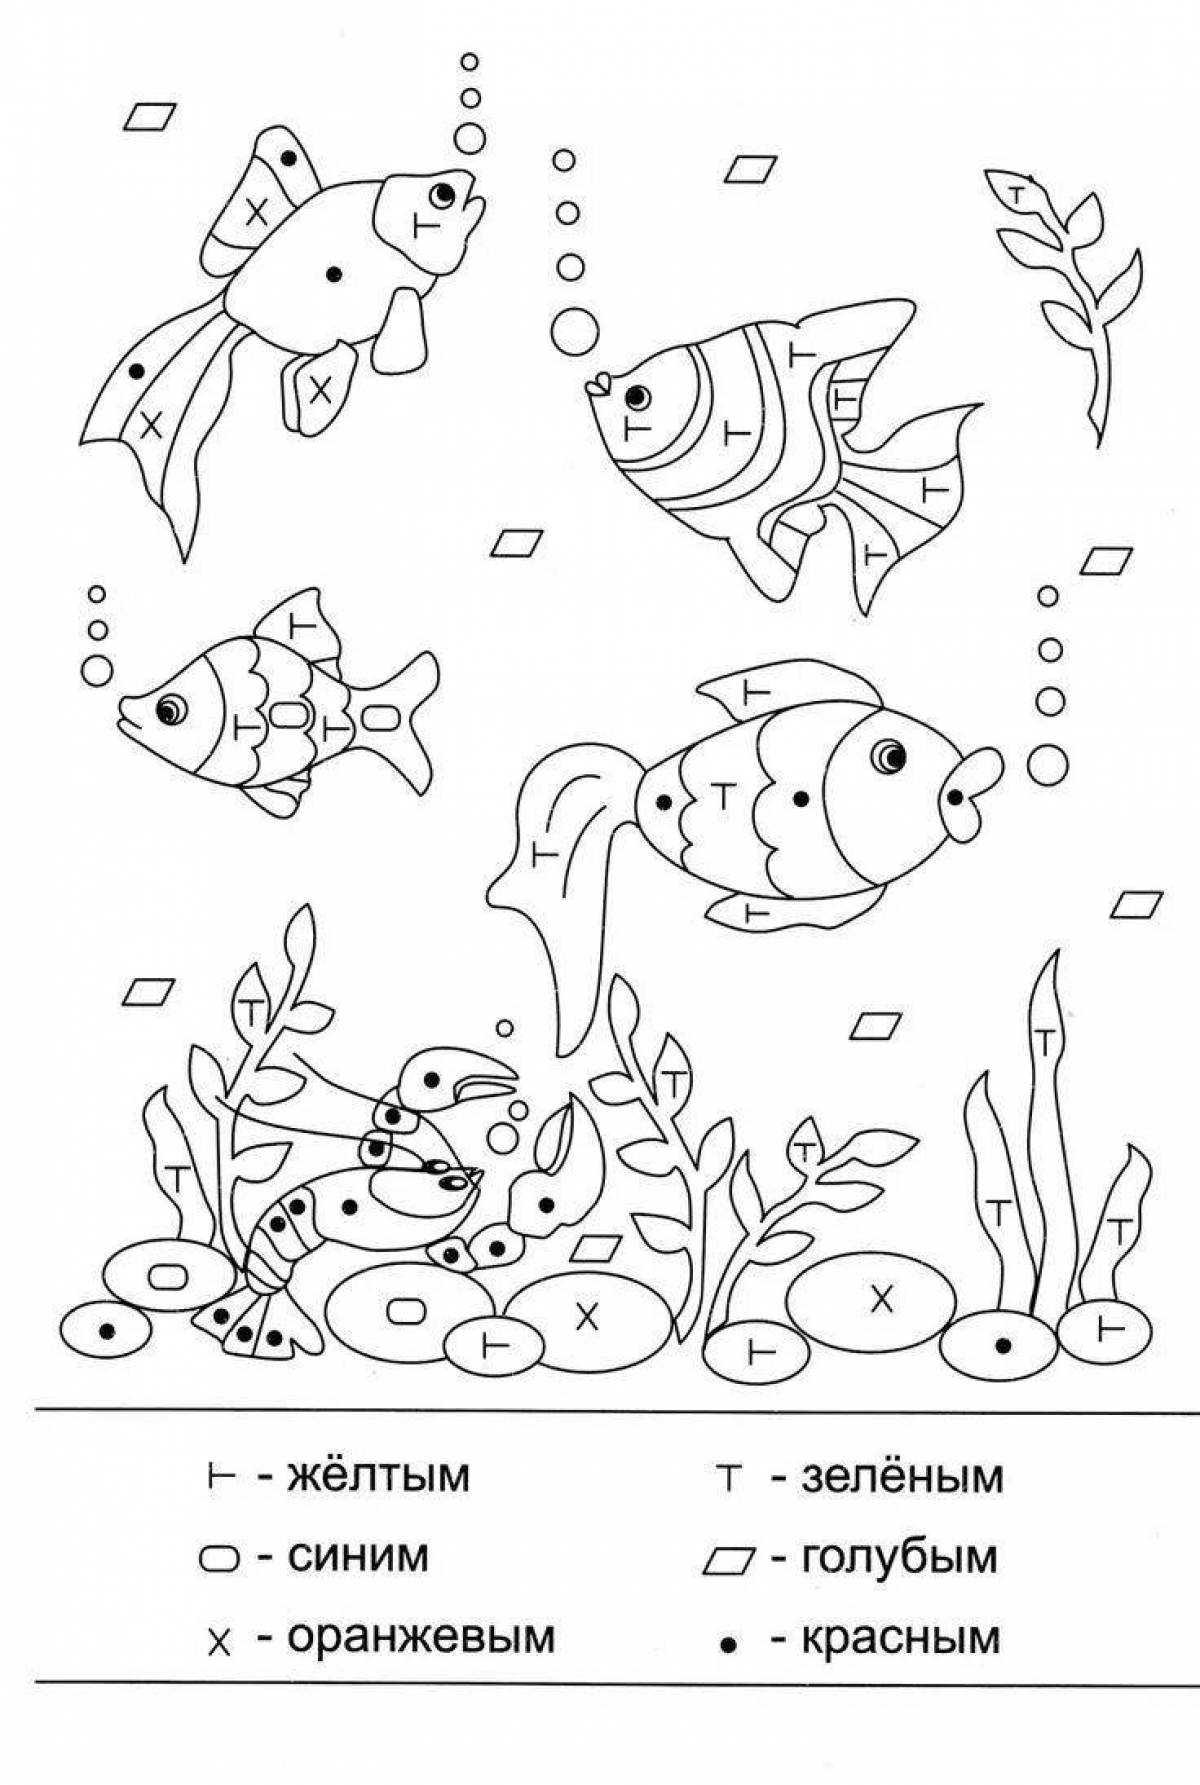 Coloring fish by numbers